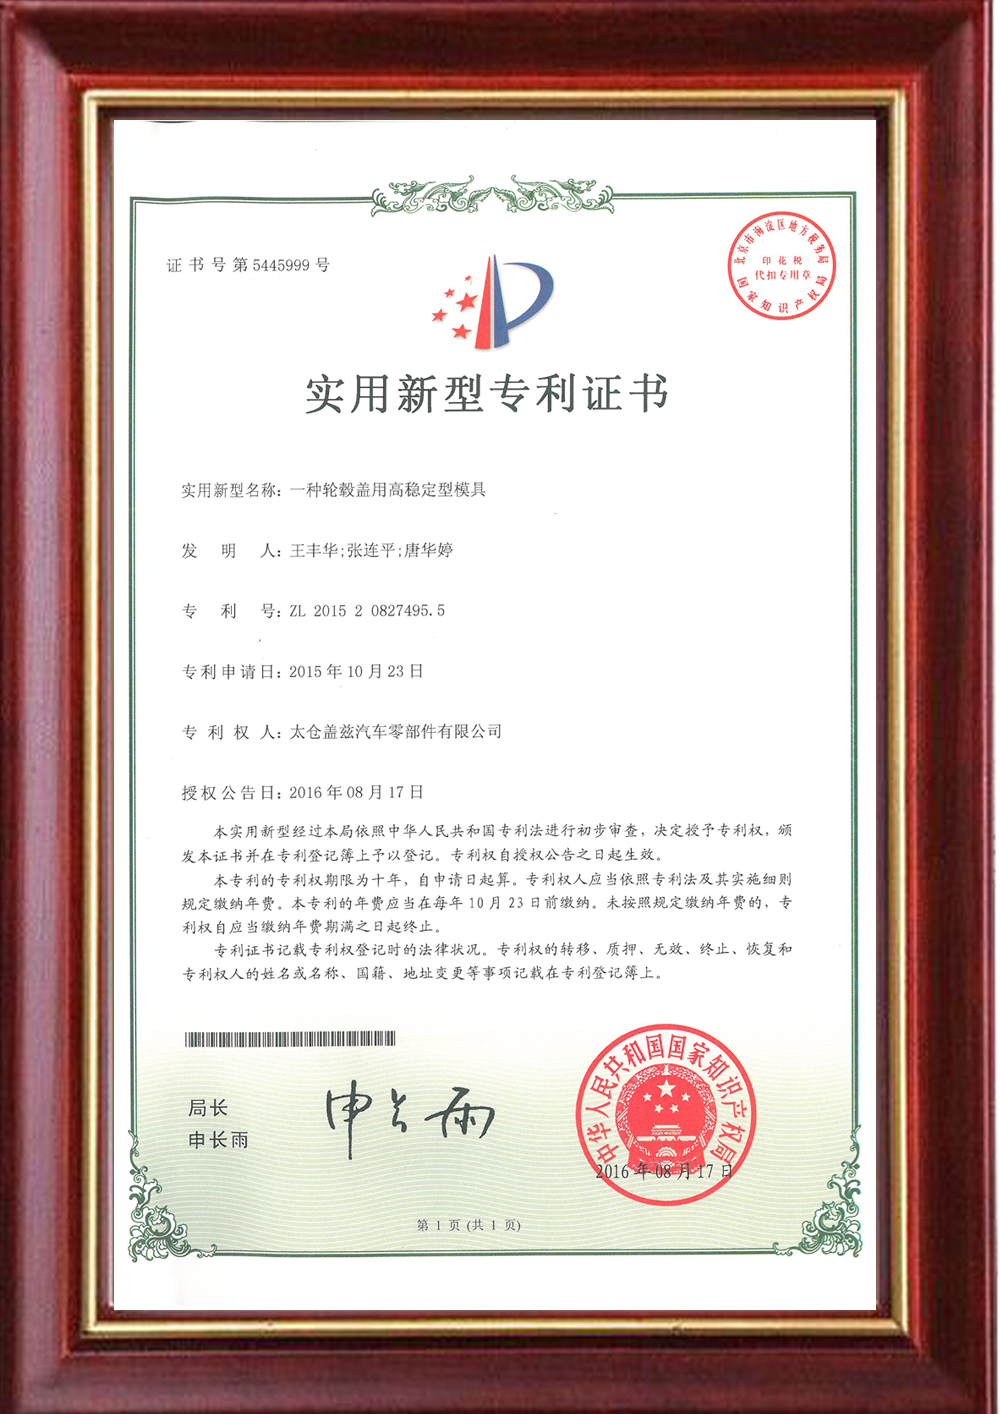 Utility model patent certificate - high stability mold